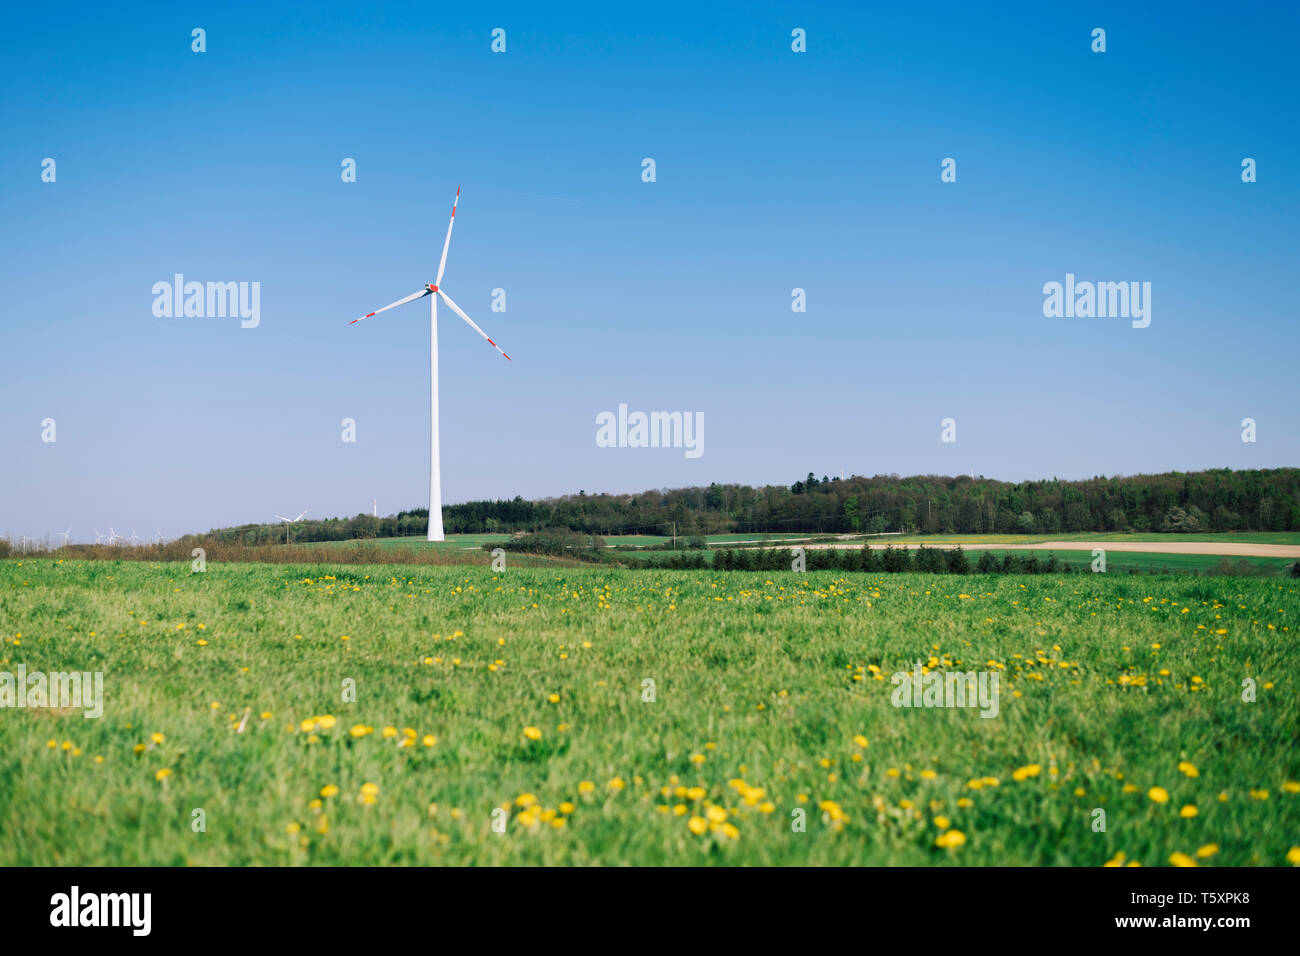 a windmill in the field, with yellow flowers in foreground Stock Photo